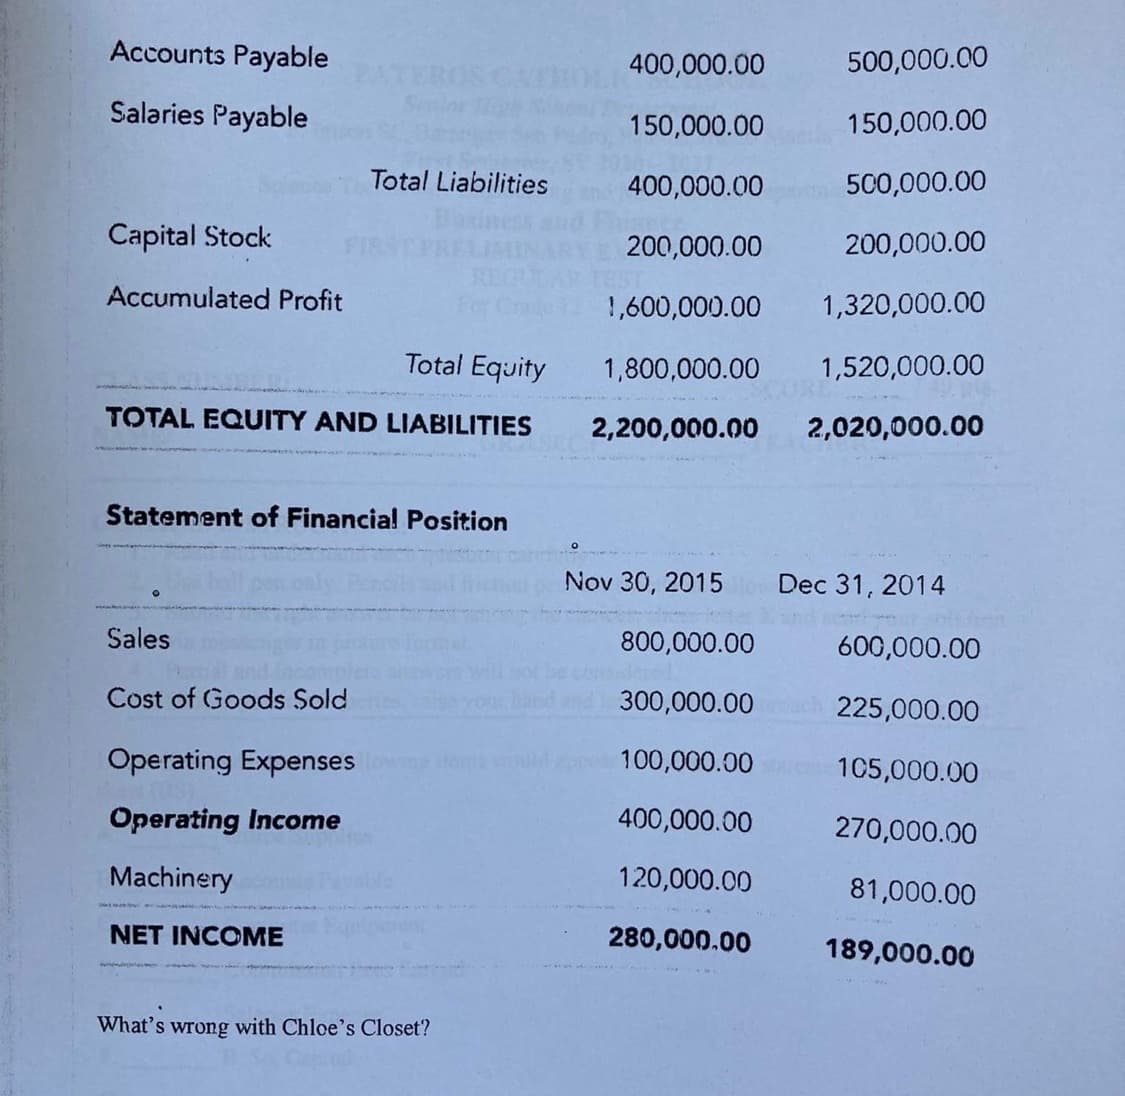 Accounts Payable
400,000.00
500,000.00
EROS
Salaries Payable
150,000.00
150,000.00
Total Liabilities
400,000.00
500,000.00
Capital Stock
200,000.00
200,000.00
Accumulated Profit
1,600,000.00
1,320,000.00
Total Equity
1,800,000.00
1,520,000.00
TOTAL EQUITY AND LIABILITIES
2,200,000.00
2,020,000.00
Statement of Financia! Position
Nov 30, 2015
Dec 31, 2014
Sales
800,000.00
600,000.00
Cost of Goods Sold
300,000.00
225,000.00
Operating Expenses
100,000.00
105,000.00
Operating Income
400,000.00
270,000.00
Machinery
120,000.00
81,000.00
NET INCOME
280,000.00
189,000.00
What's wrong with Chloe's Closet?
